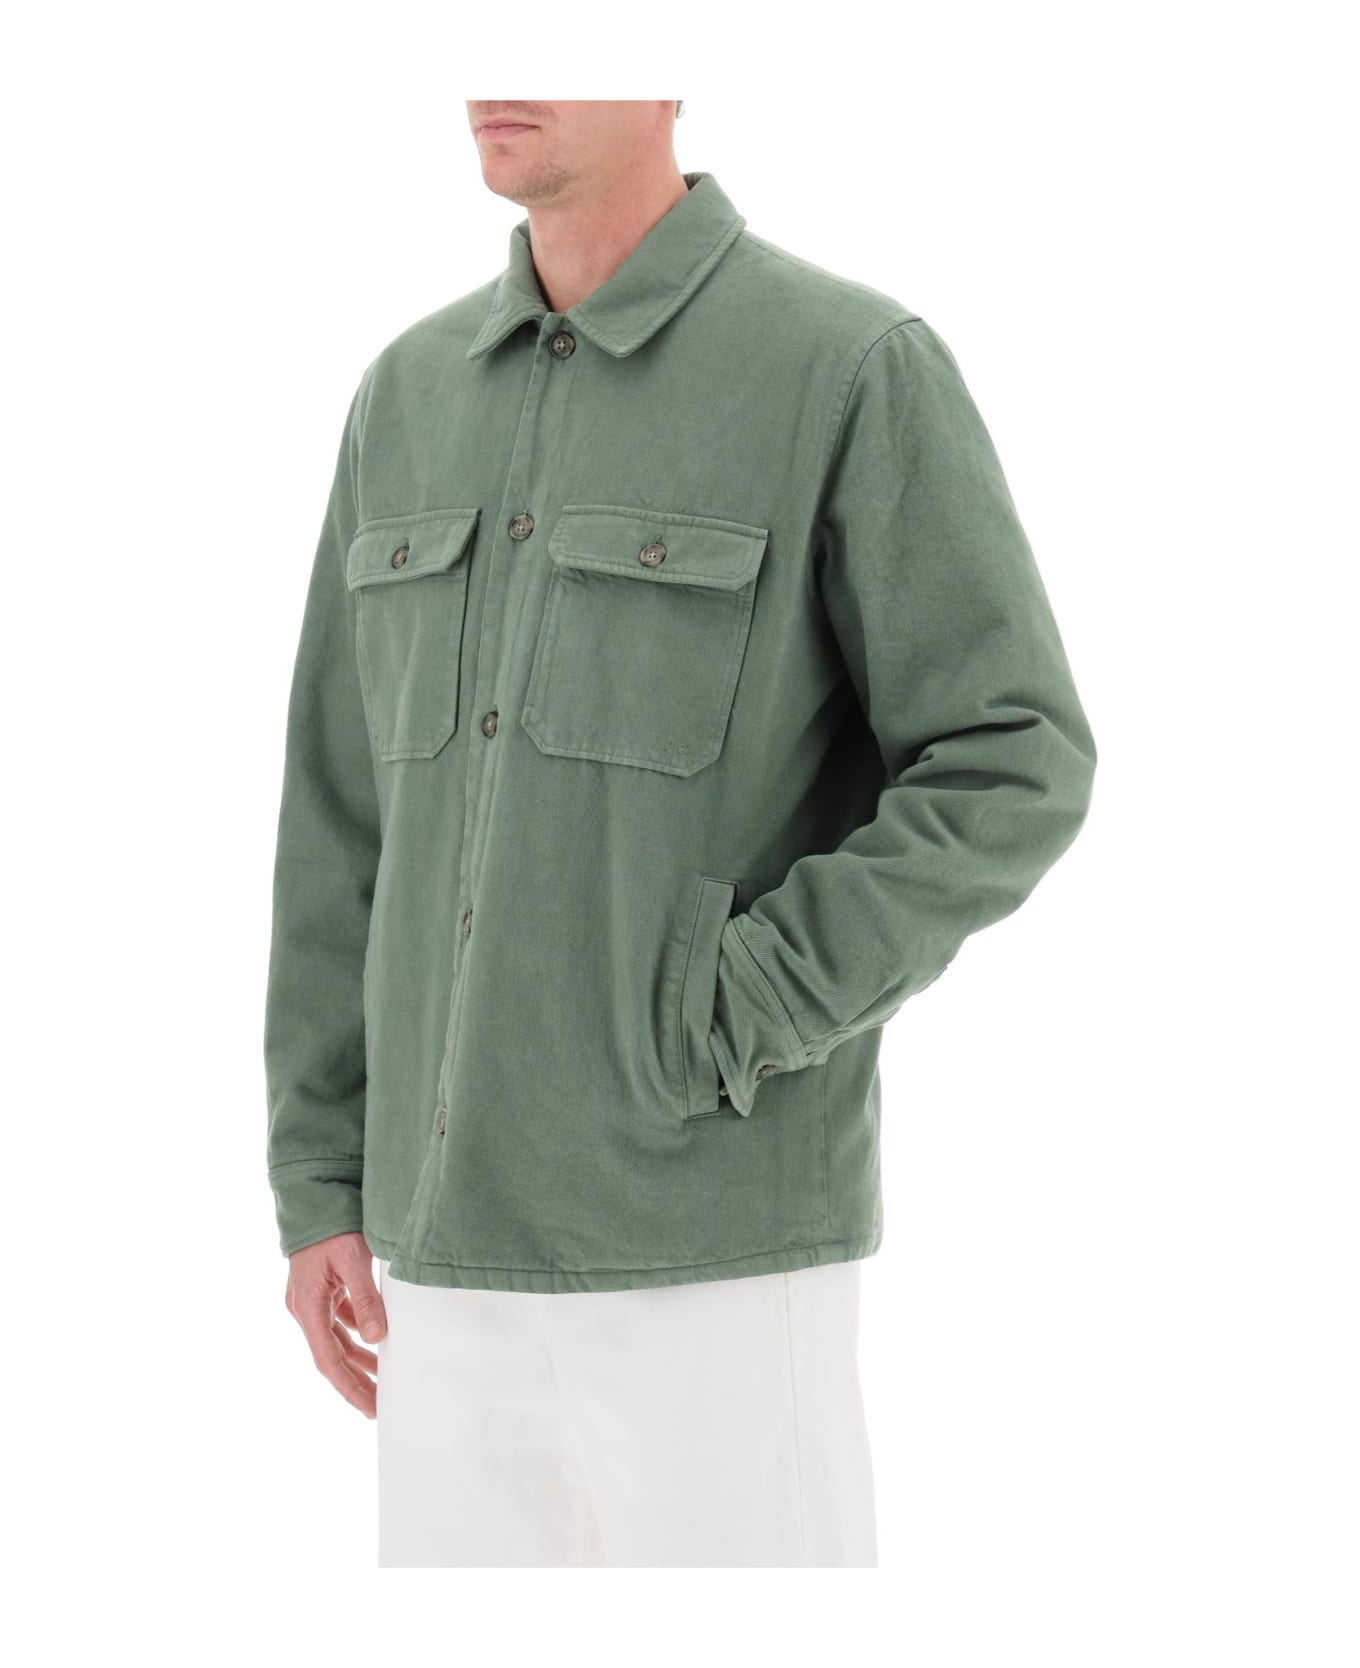 A.P.C. Alessio Padded Overshirt - FORET (Green) ジャケット